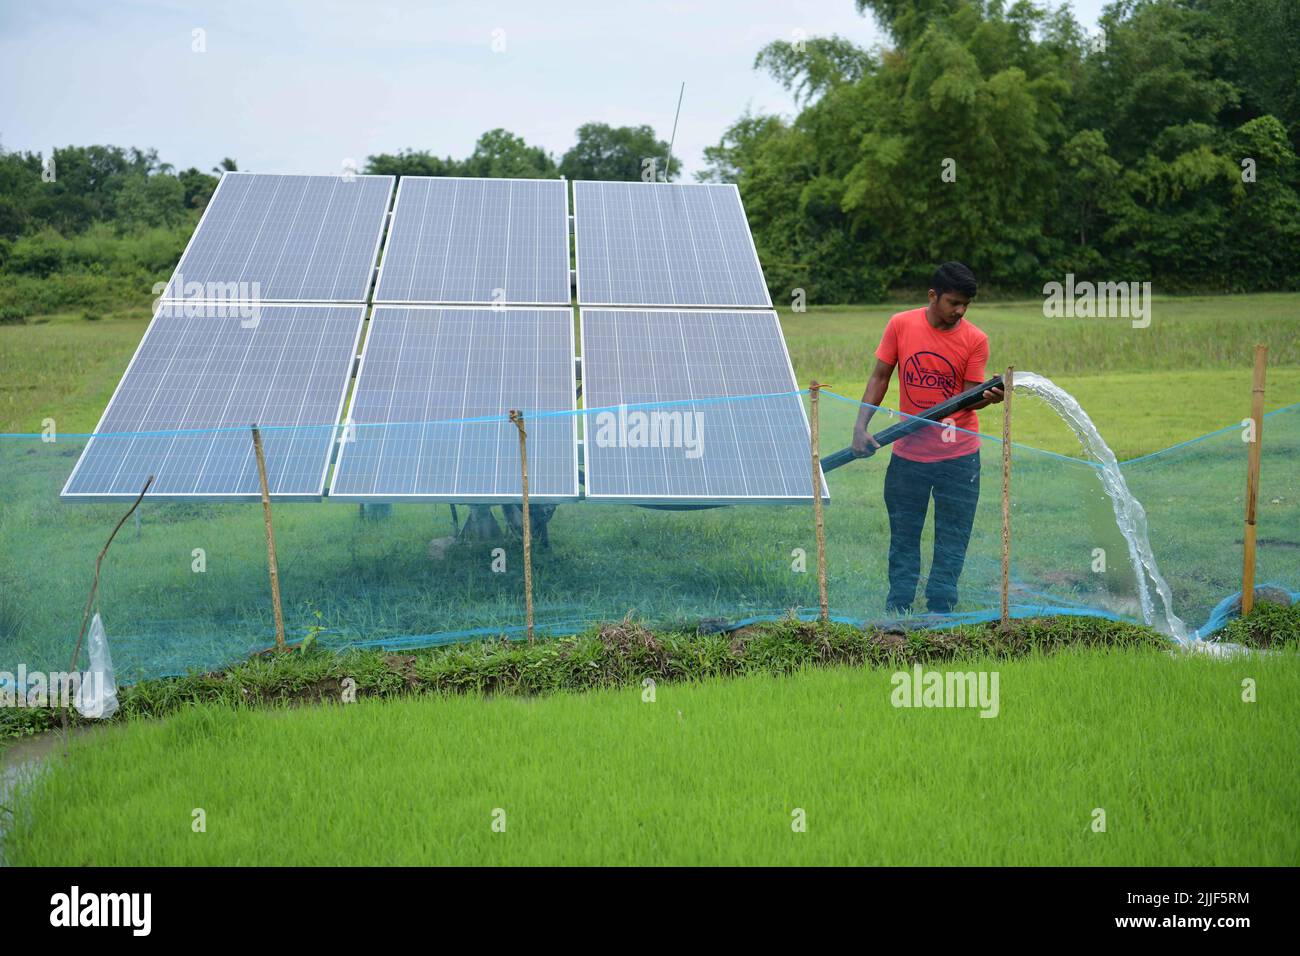 Ripan Deb, a 37 year old farmer putting water to his field through a solar-powered water pump which was installed in his field with the help of the Government of Tripura’s subsidised policy in Gokulnagar, Agartala. Tripura, India. Stock Photo